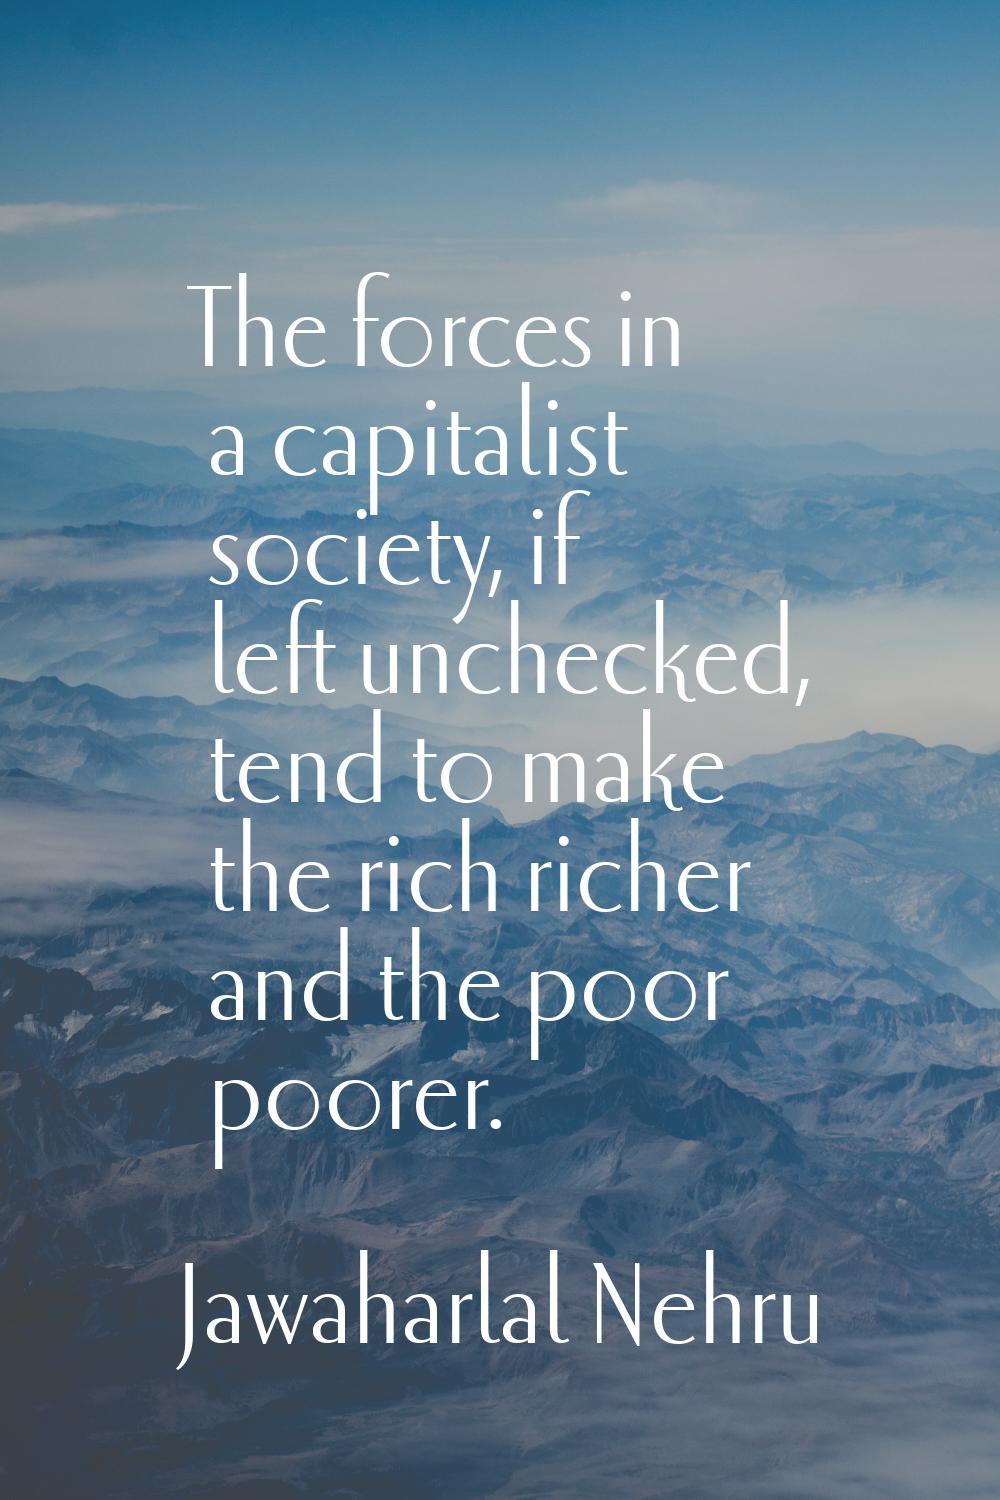 The forces in a capitalist society, if left unchecked, tend to make the rich richer and the poor po